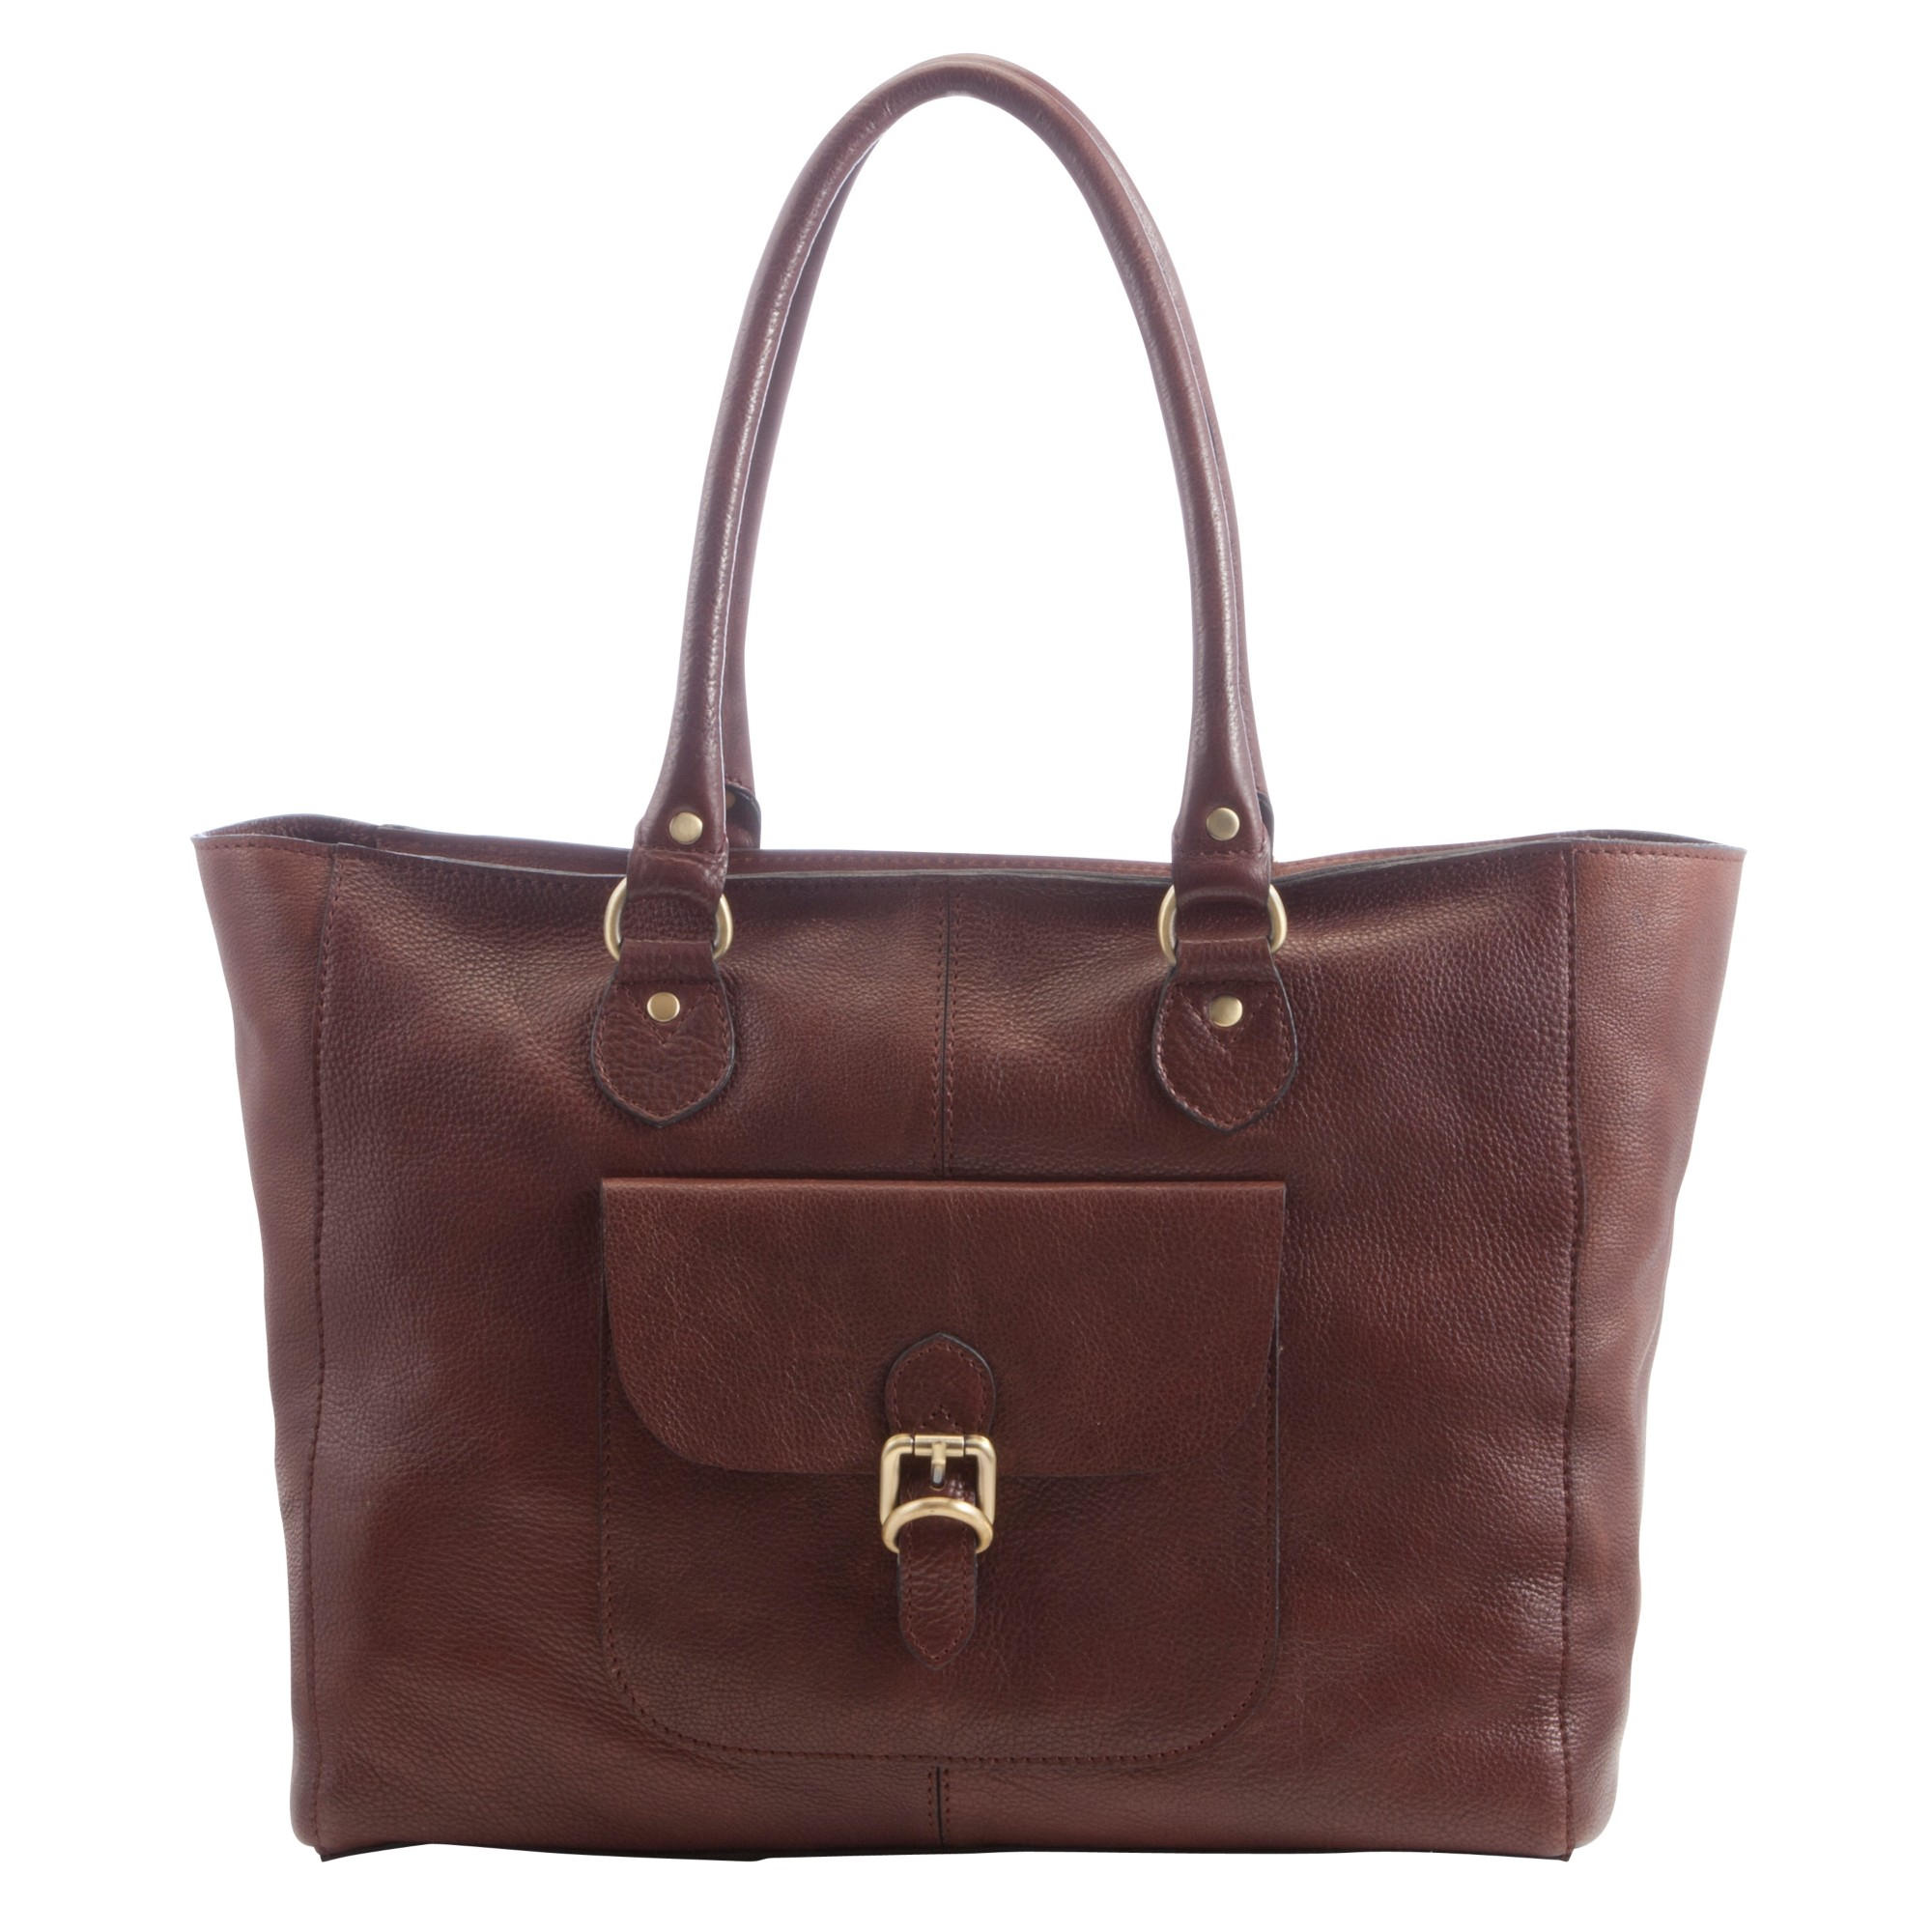 John lewis Winchester Large Leather Tote Bag in Brown (Dark Tan) | Lyst